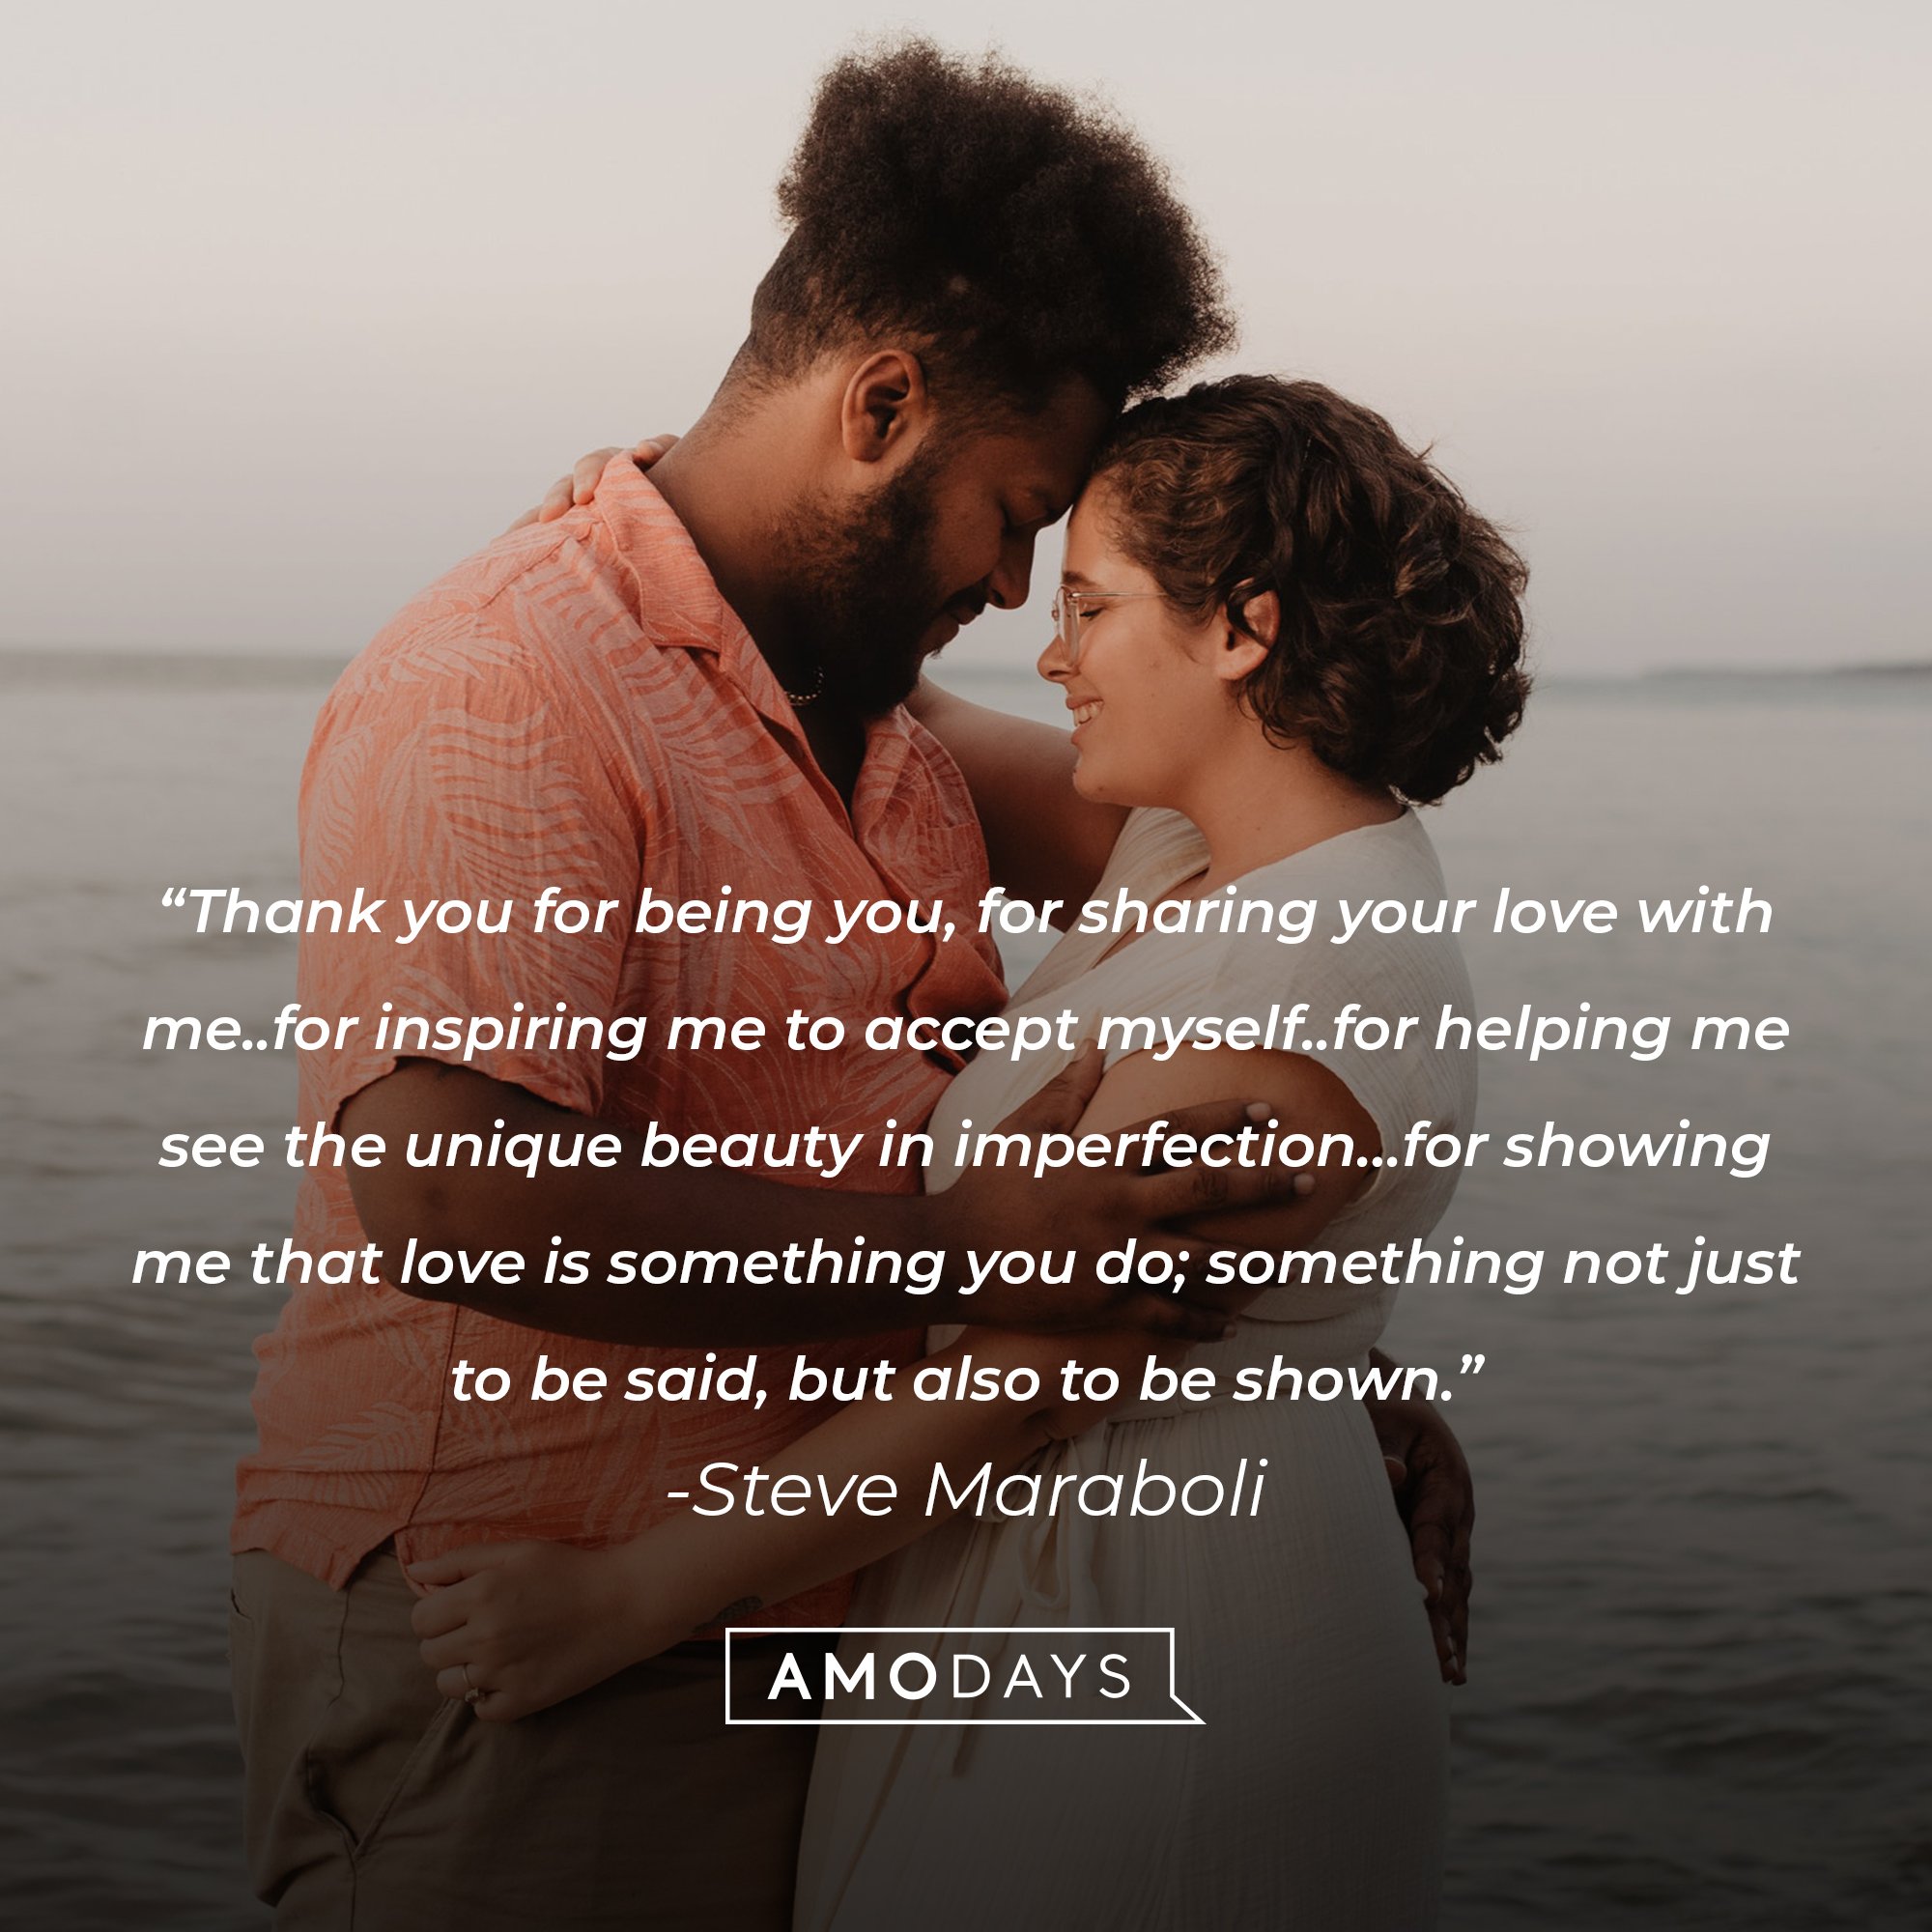 Steve Maraboli's quote: “Thank you for being you, for sharing your love with me..for inspiring me to accept myself..for helping me see the unique beauty in imperfection…for showing me that love is something you do; something not just to be said, but also to be shown.” | Image: AmoDays